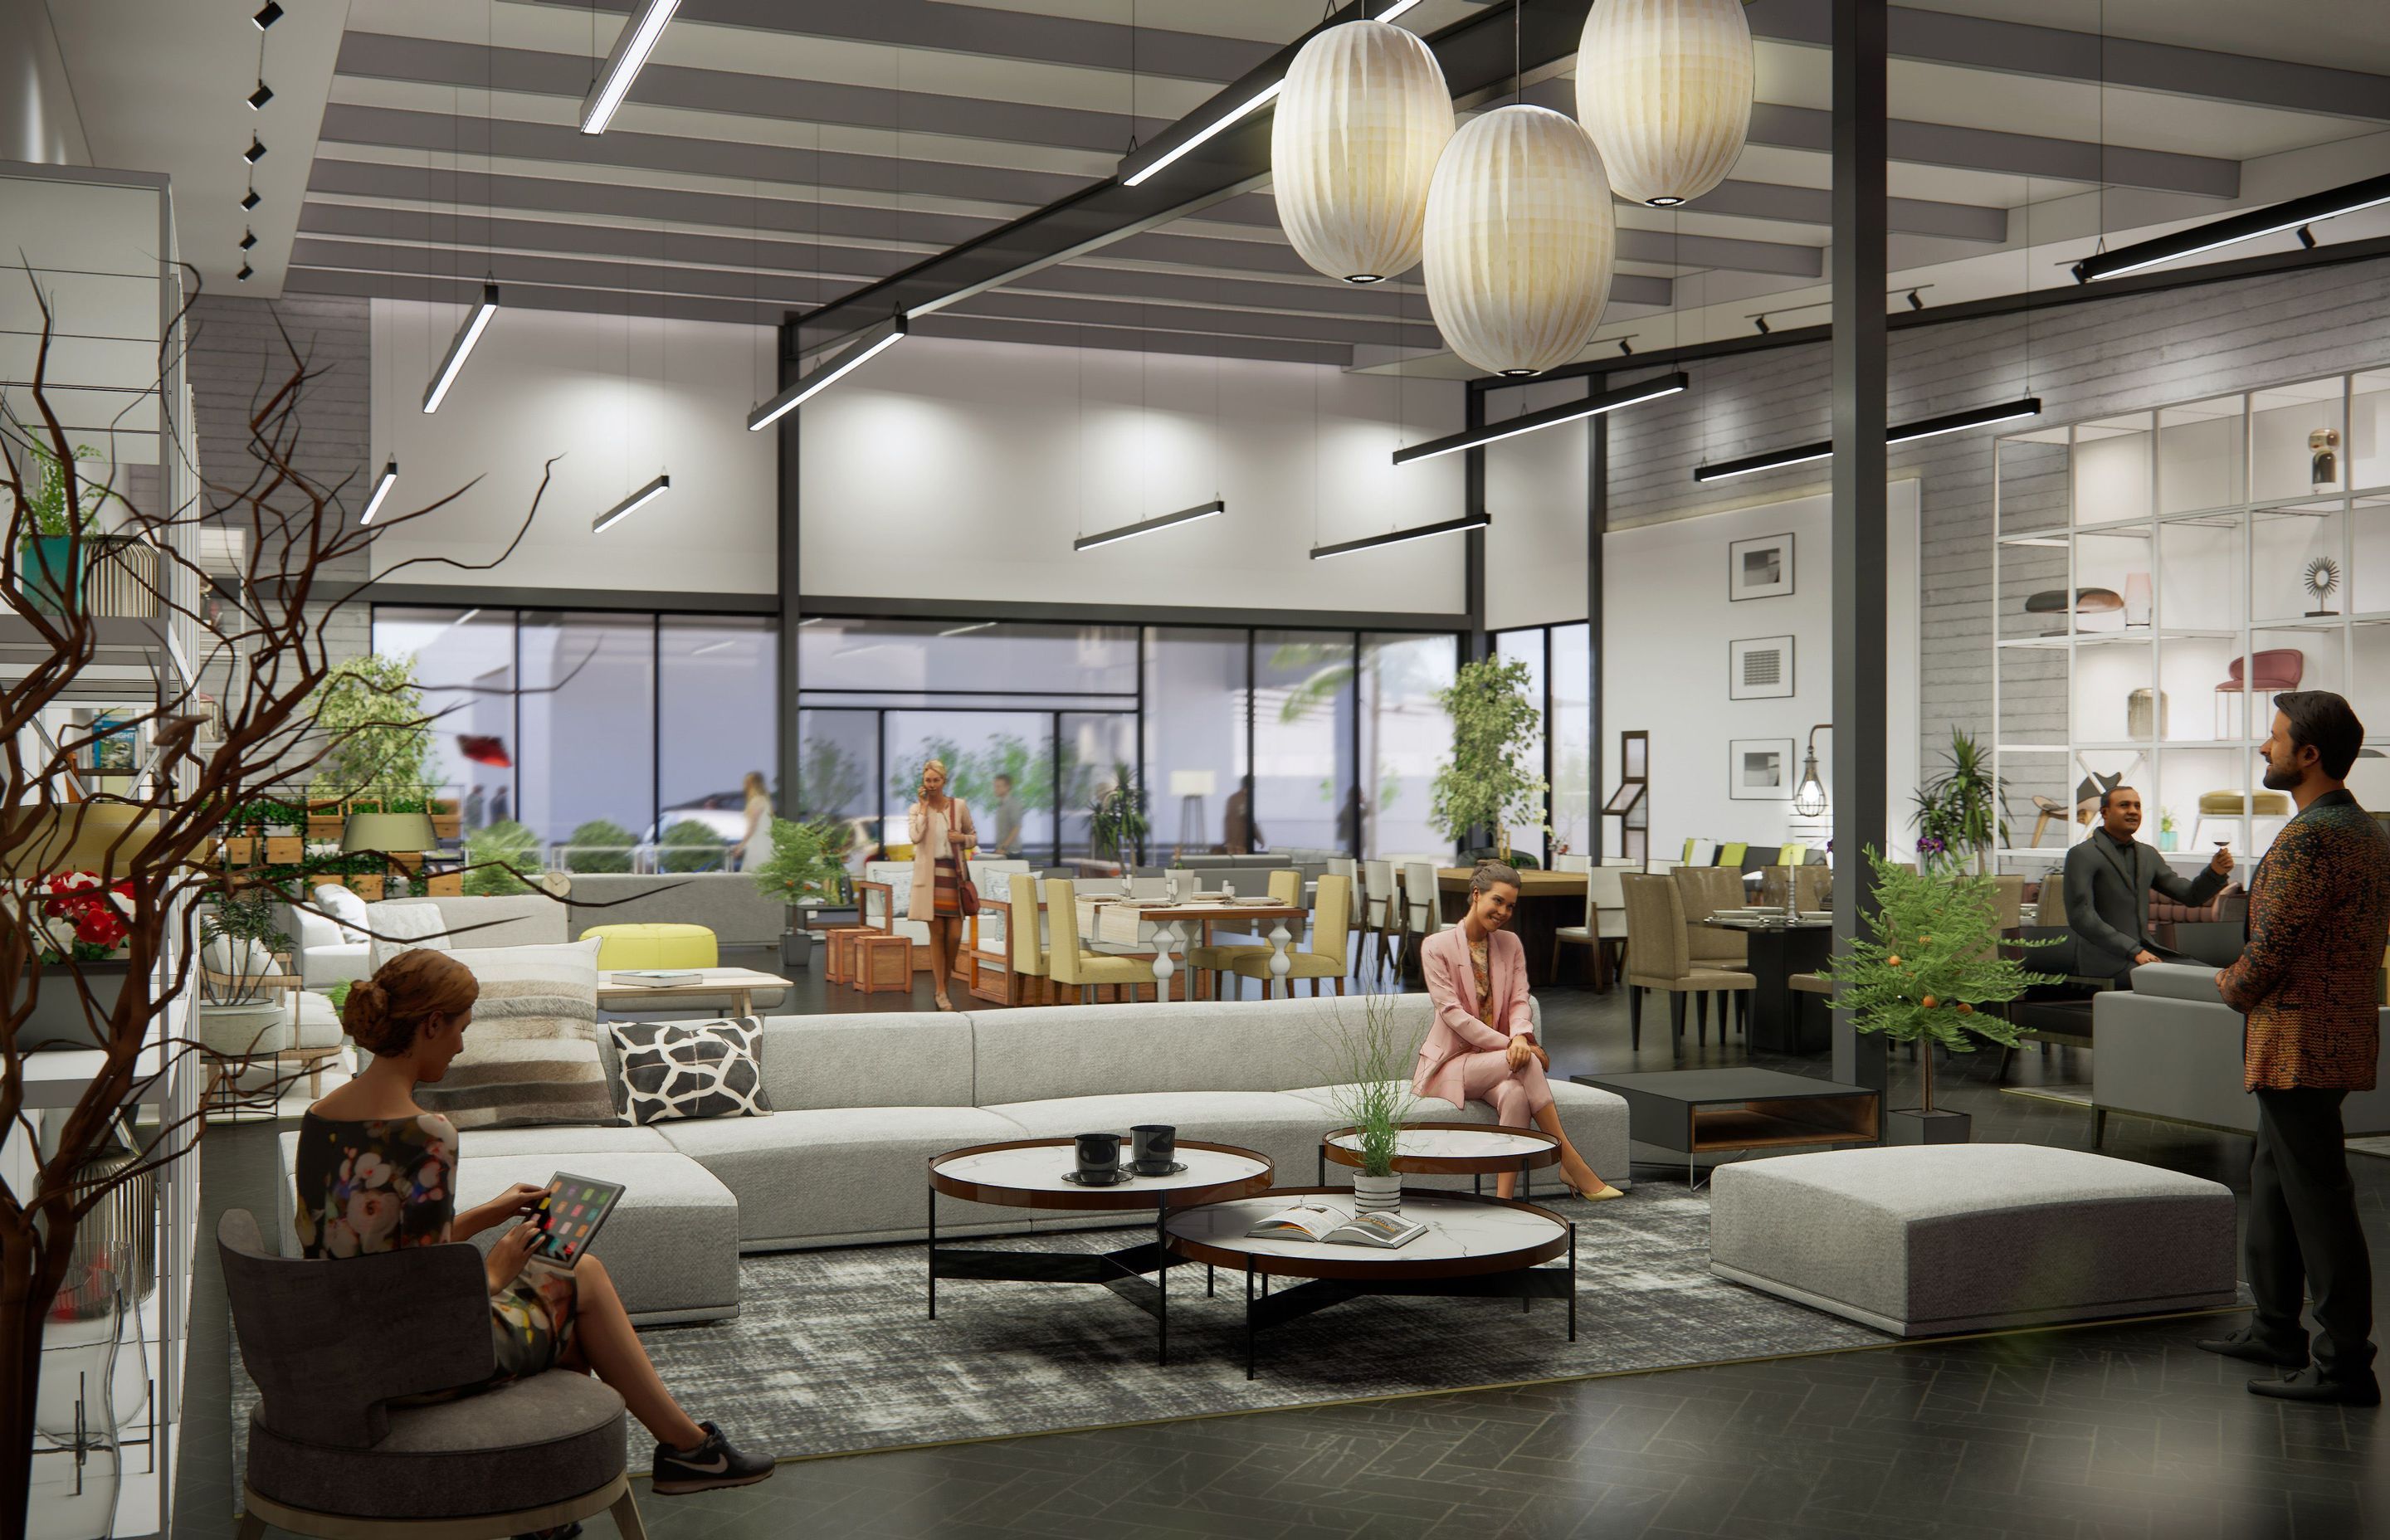 The vision for the 1.5ha site is that it will become the newest high-end home improvements centre, featuring a range of premium retailers and design-related professionals—a 'one-stop-shop' destination for savvy design aficionados.